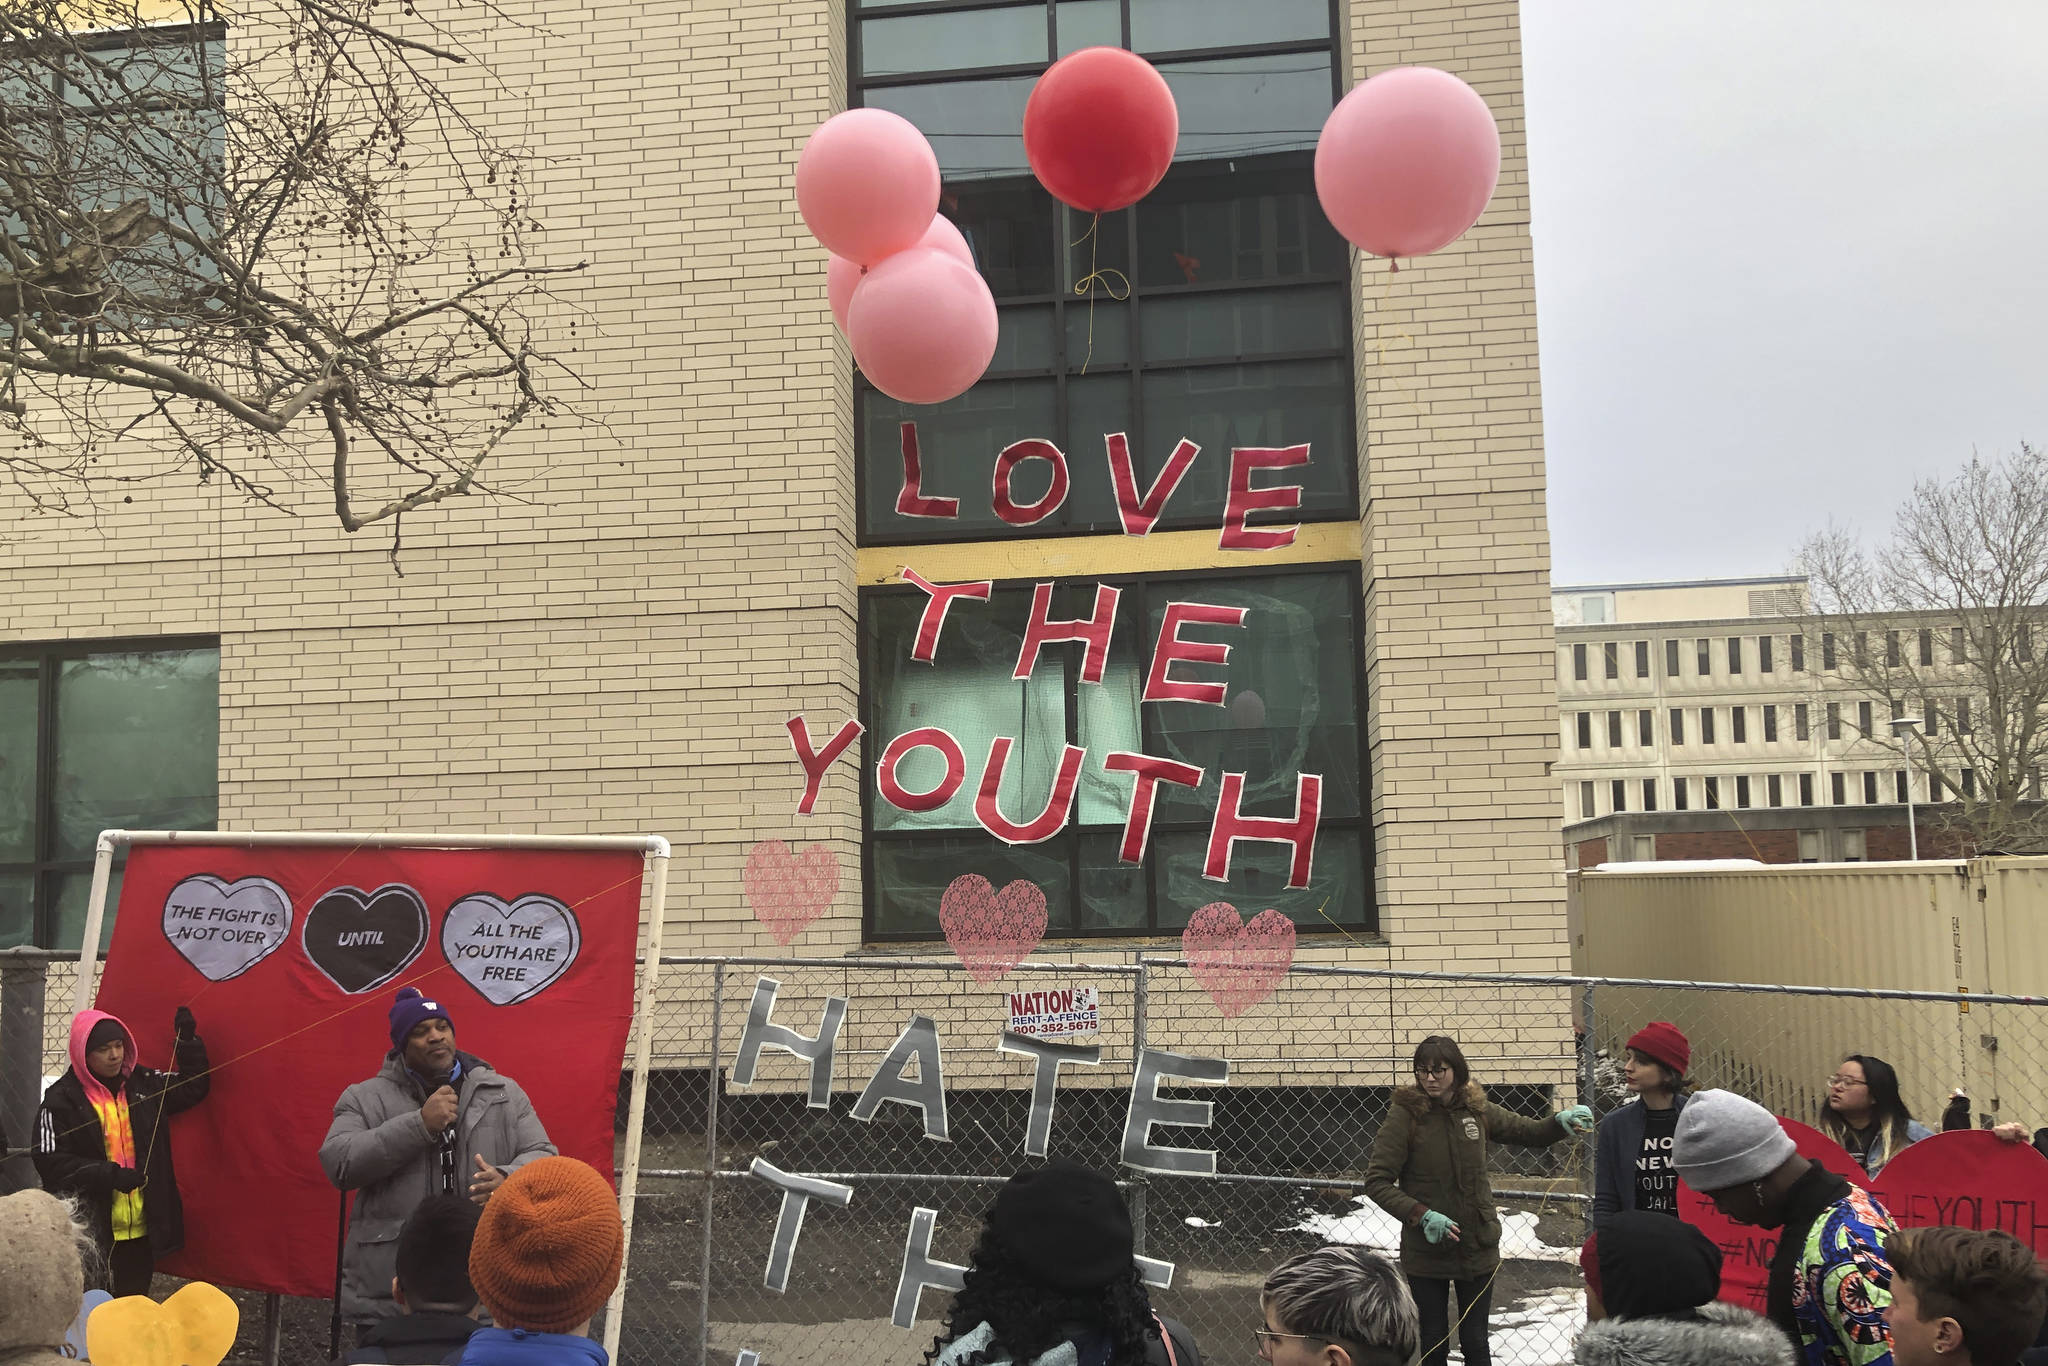 No New Youth Jail Coalition’s Valentine’s Day press conference outside of the King County Youth Services Center. Photo by Melissa Hellmann